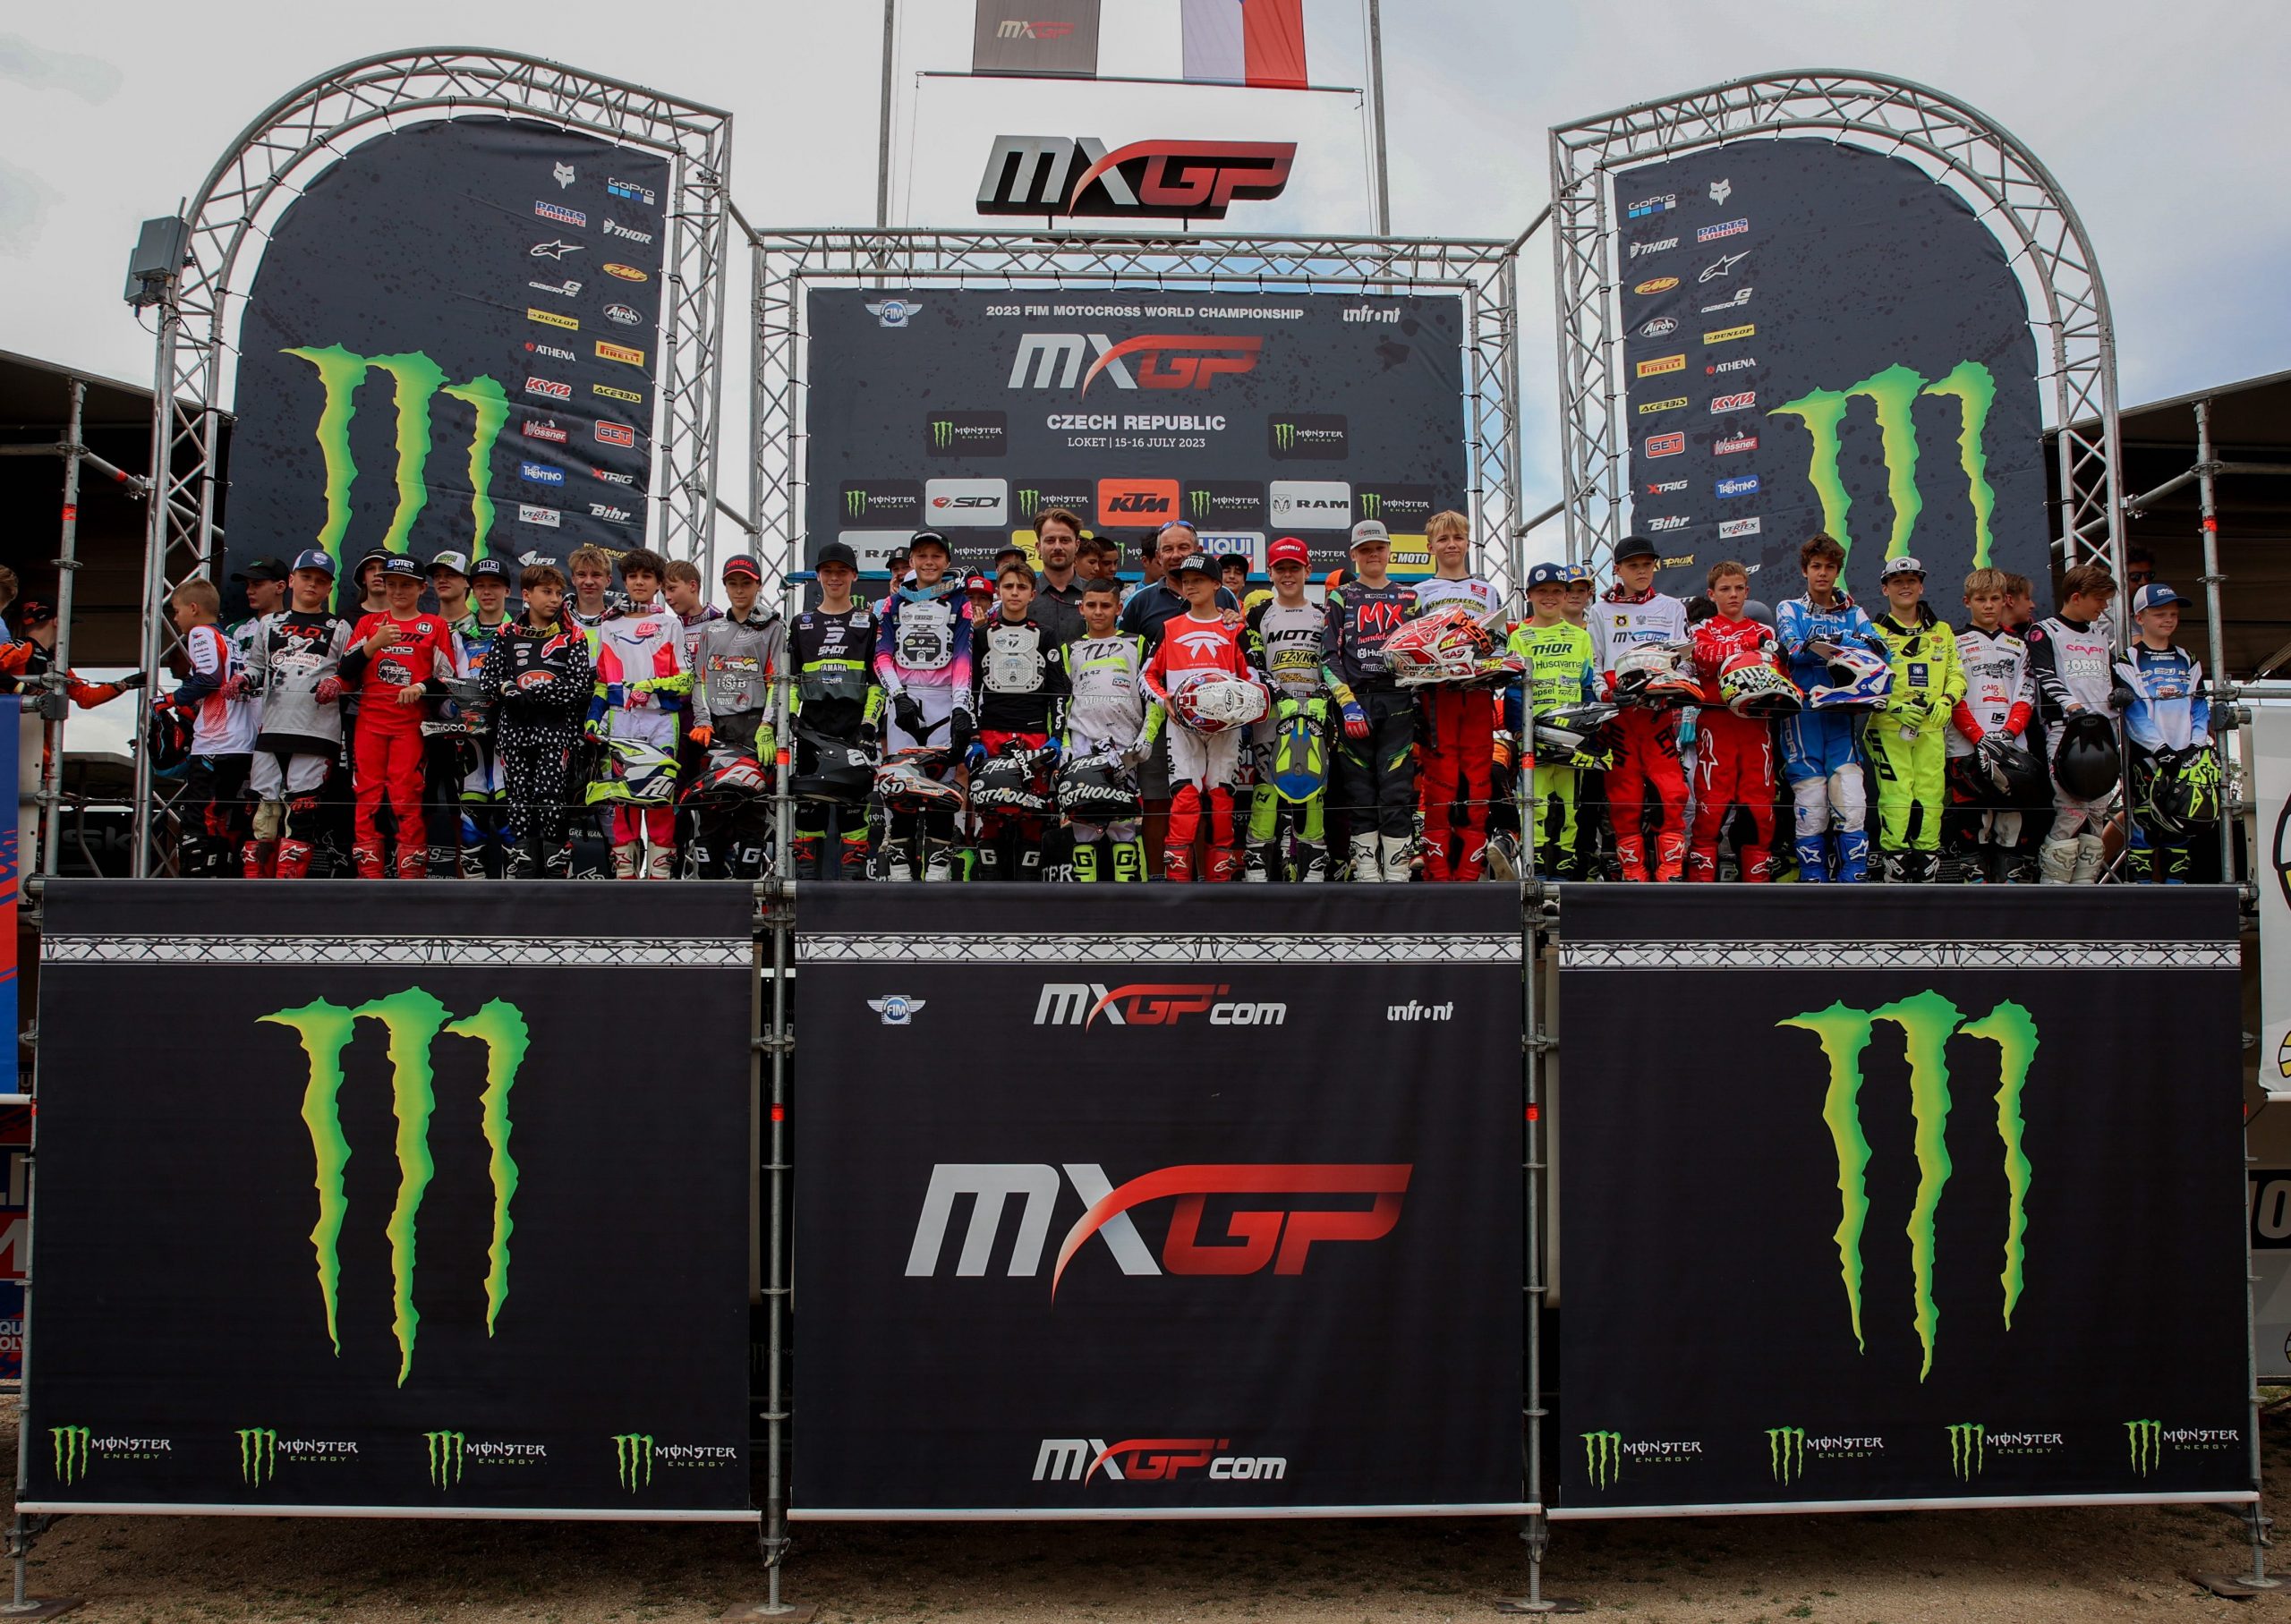 EMX65 and EMX85 European Championship Riders all set for the Finale in Loket!